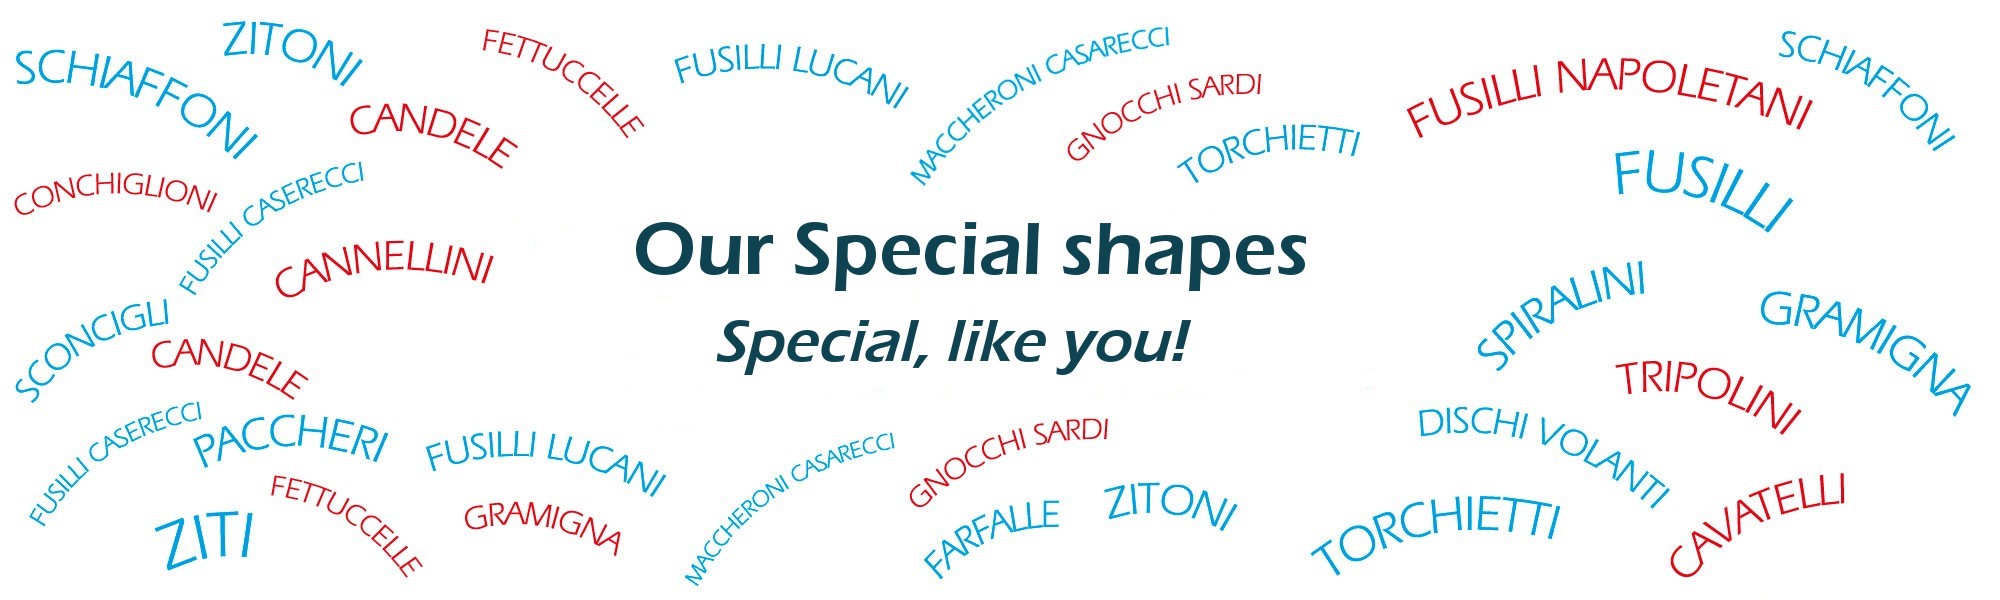 Our special shapes